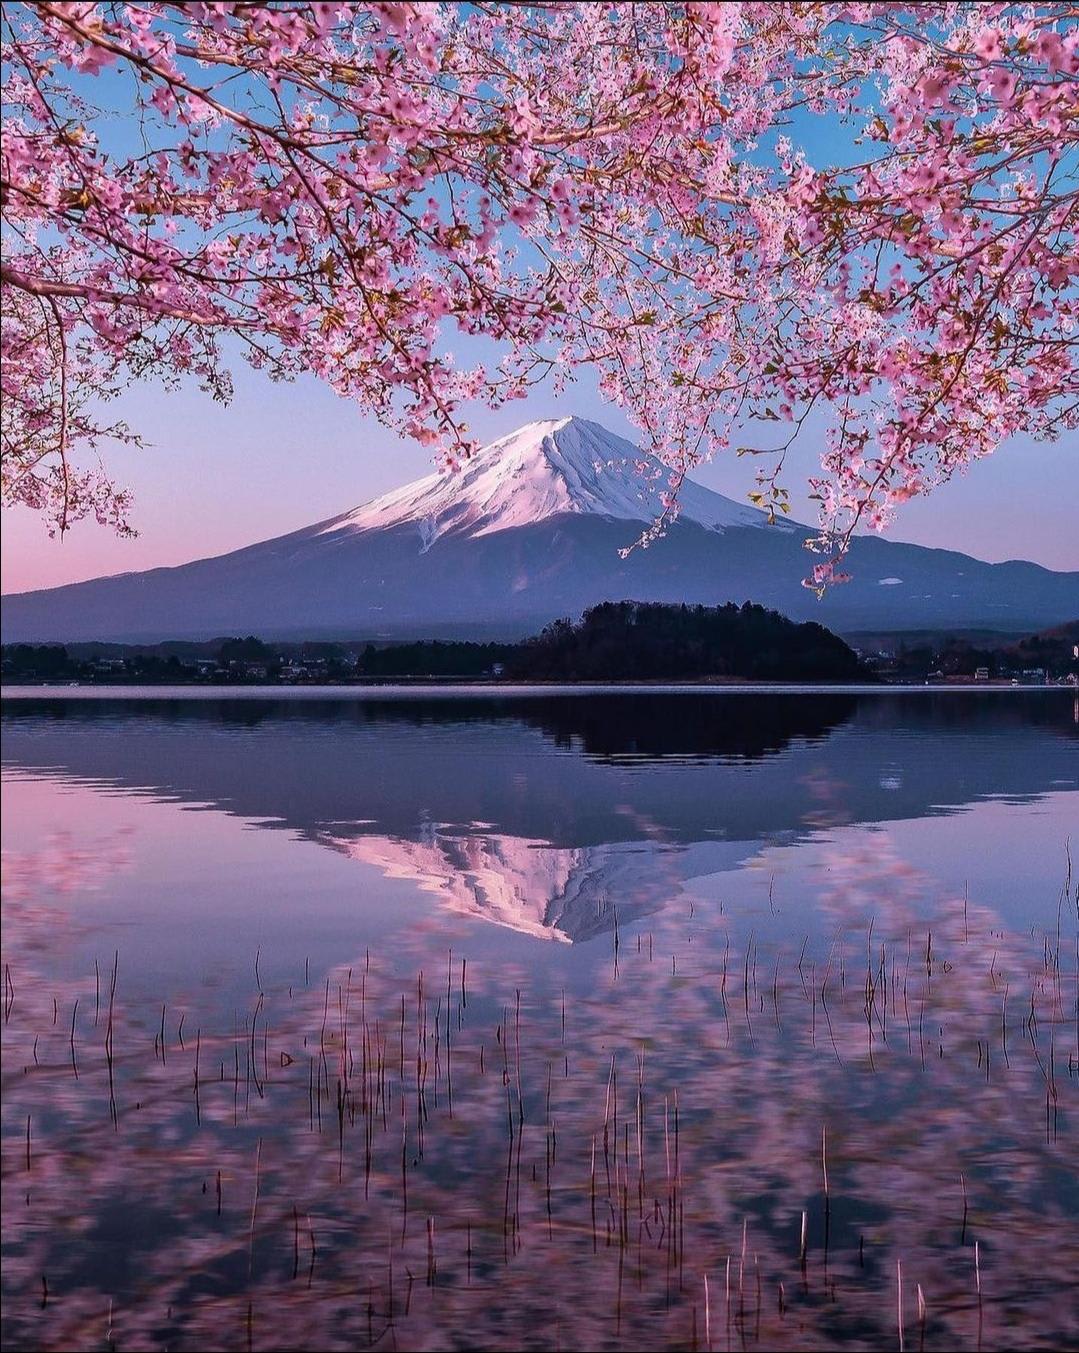 Spring in Japan is amazing